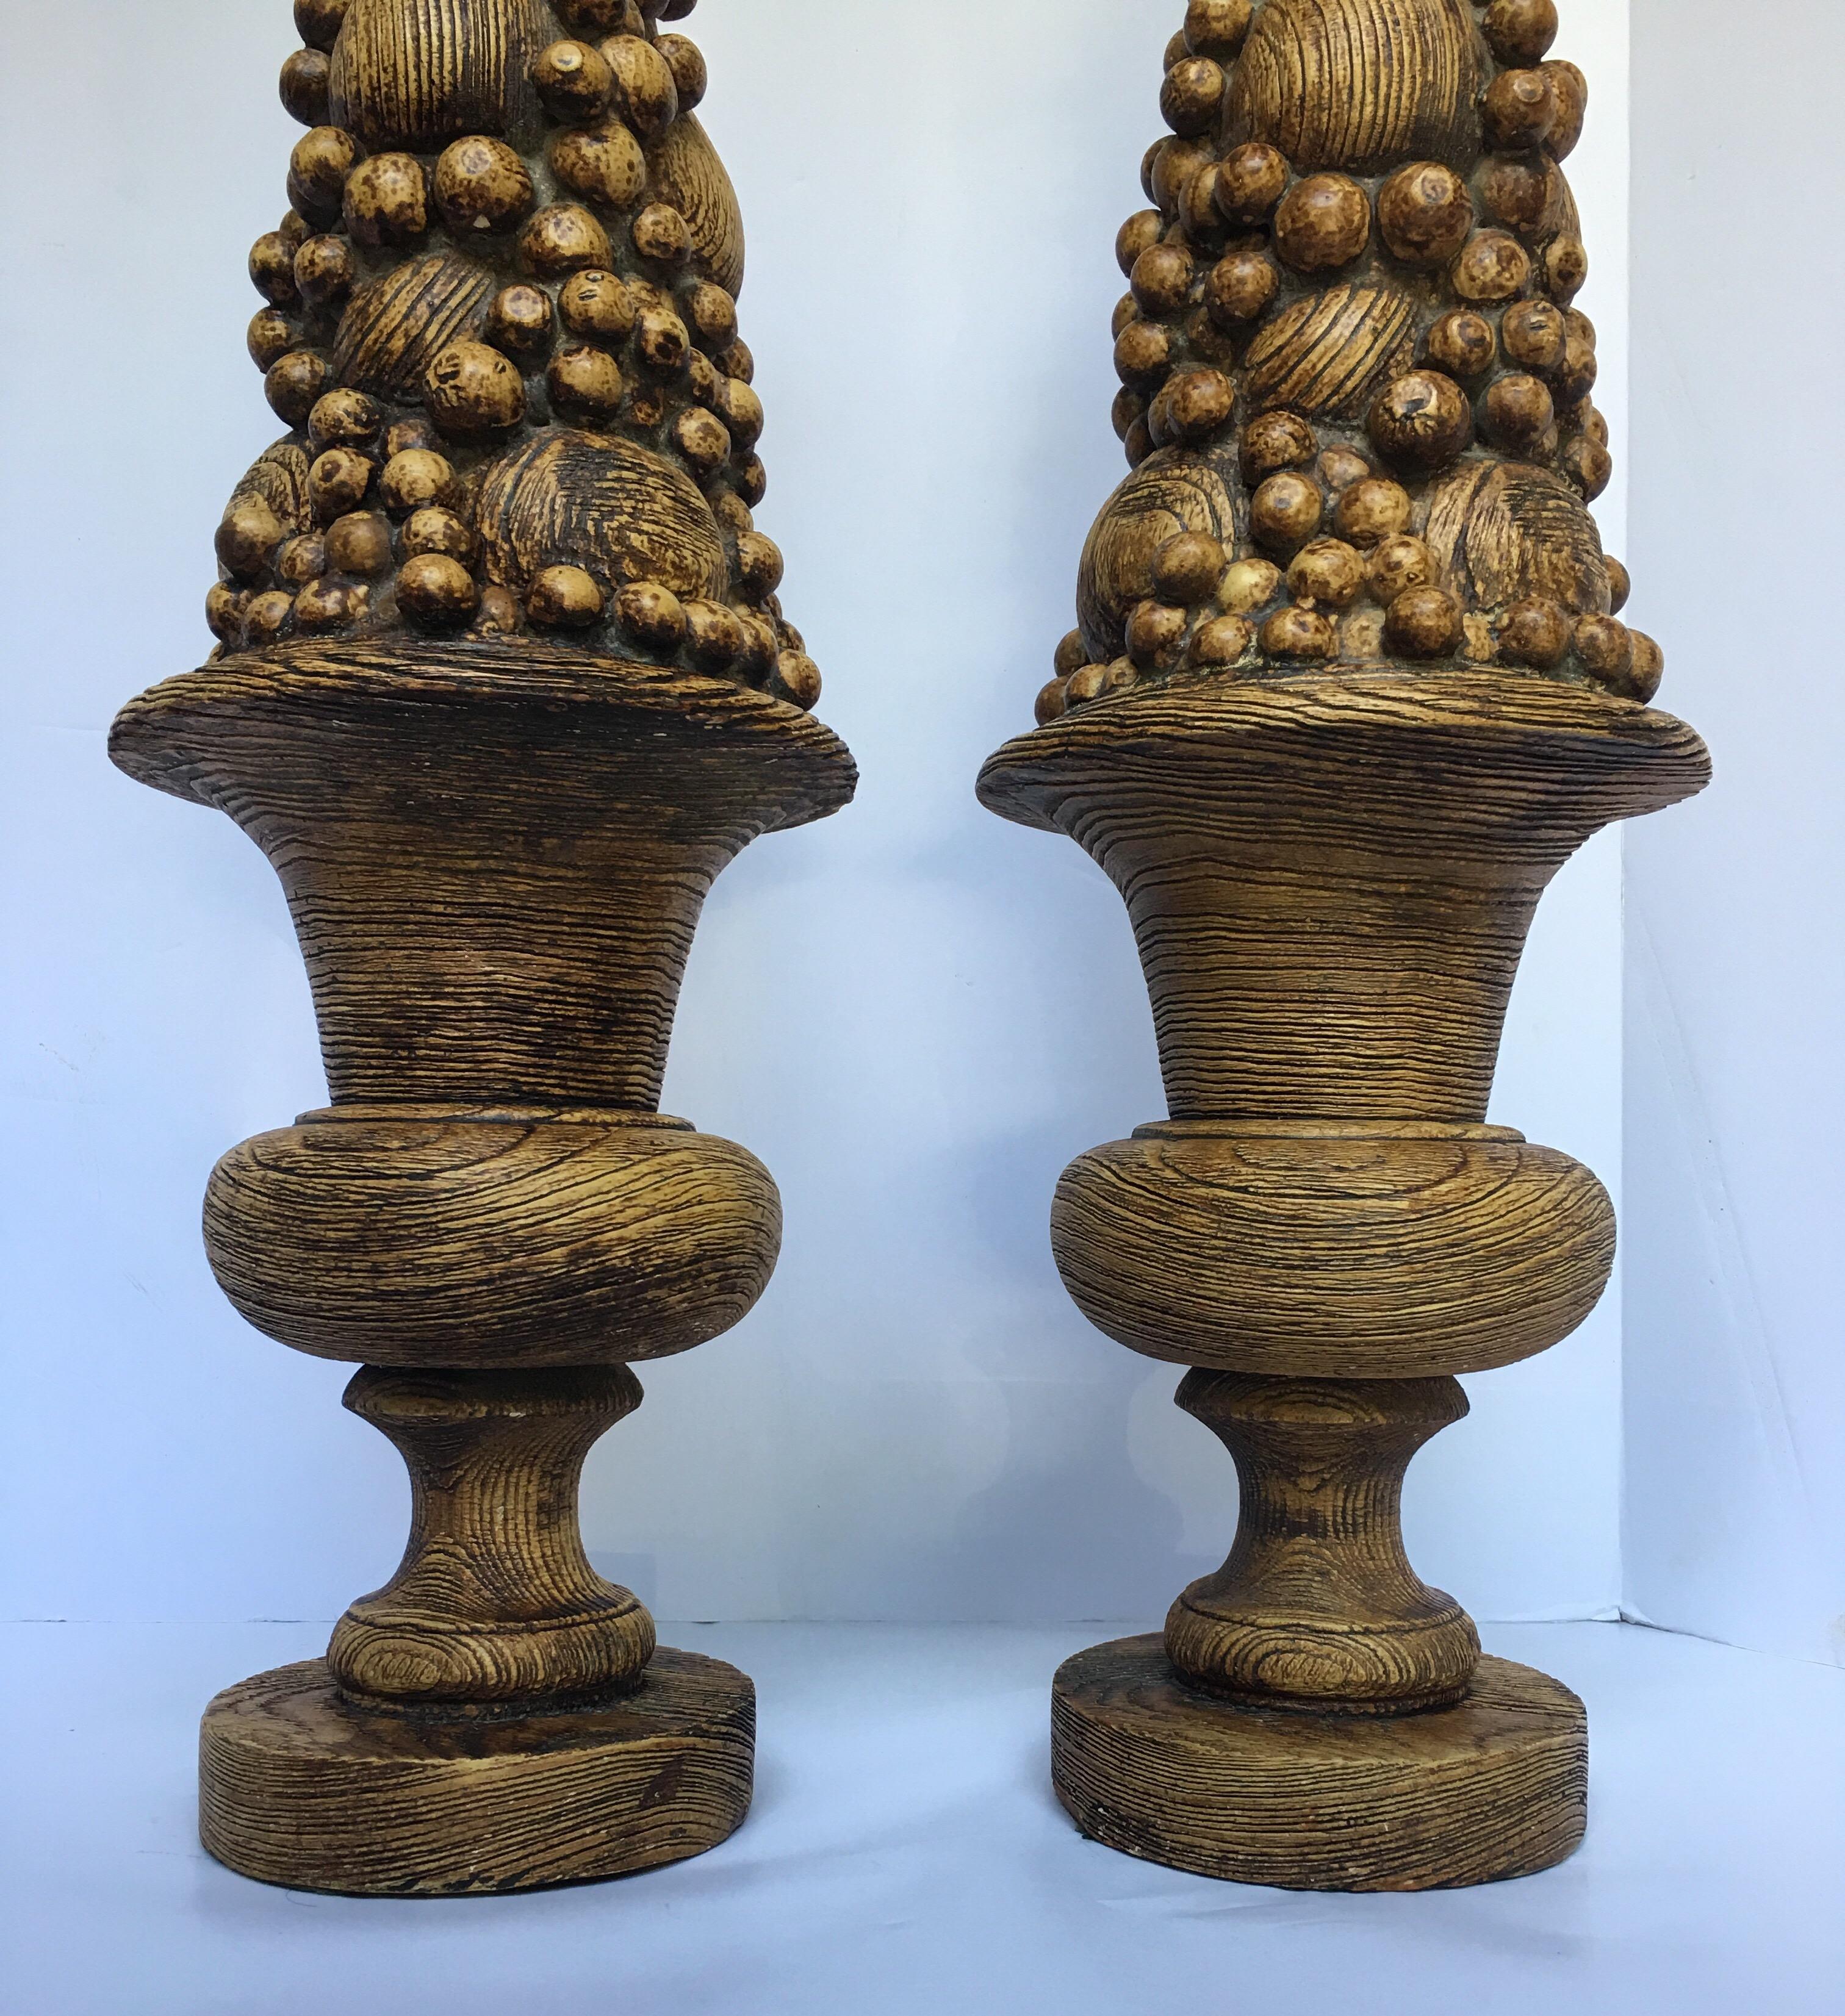 Pair of midcentury faux bois wood grain fruit topiary urns. These sculptural wood grain textured pieces are constructed of a heavy plaster. These tall obelisk form sculptures were once electrified table lamps and have been converted into decorative